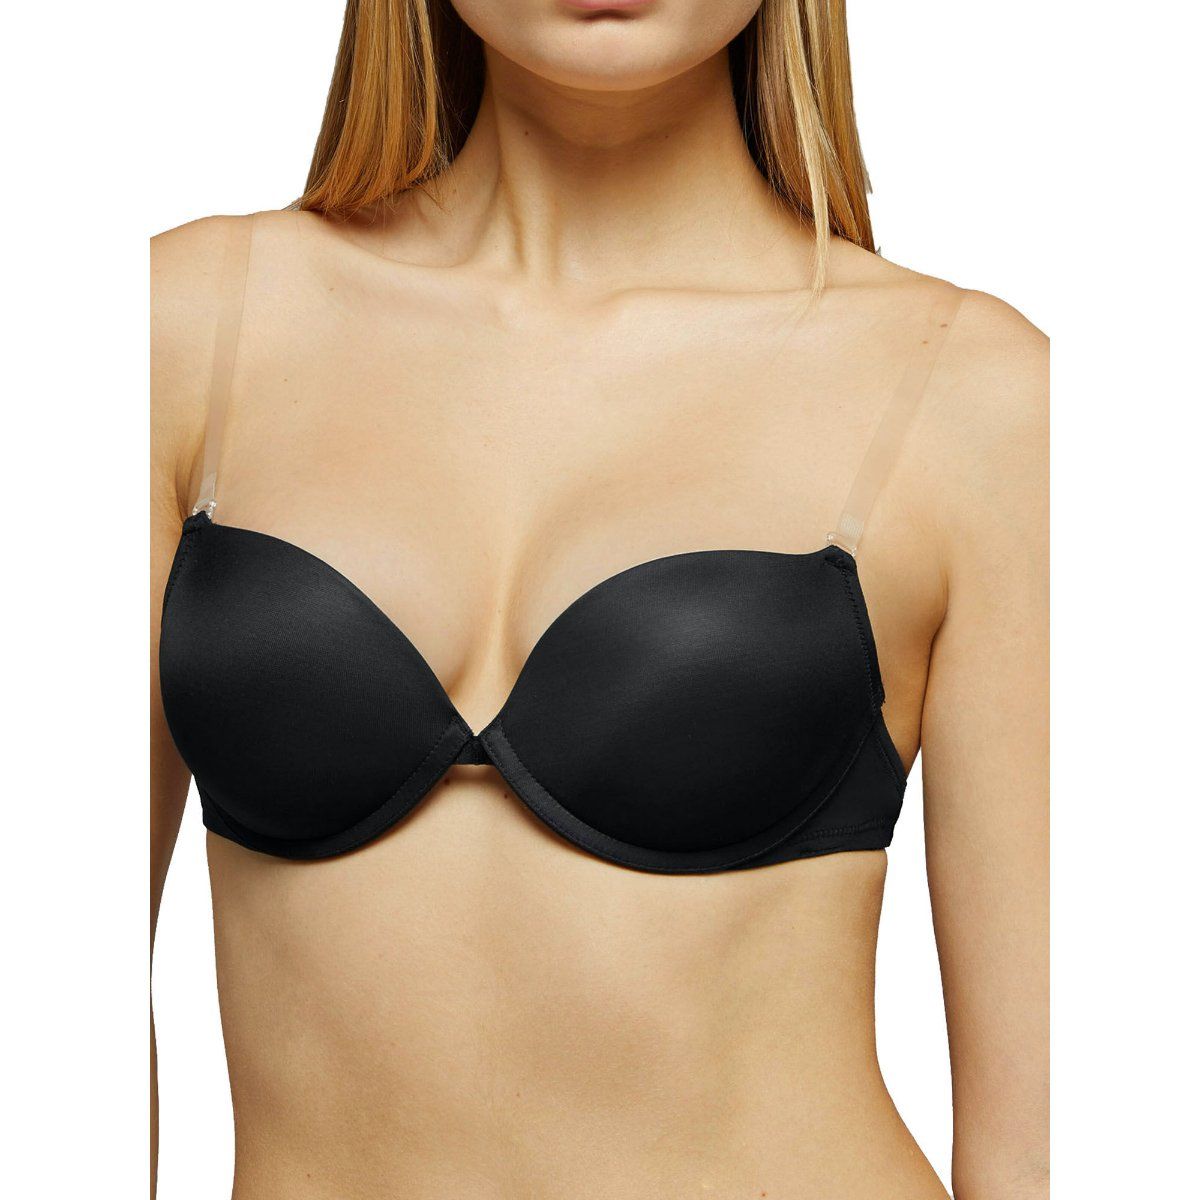 ETAM Paris Black Under Wired Padded Front Open Bra Price in India, Full  Specifications & Offers